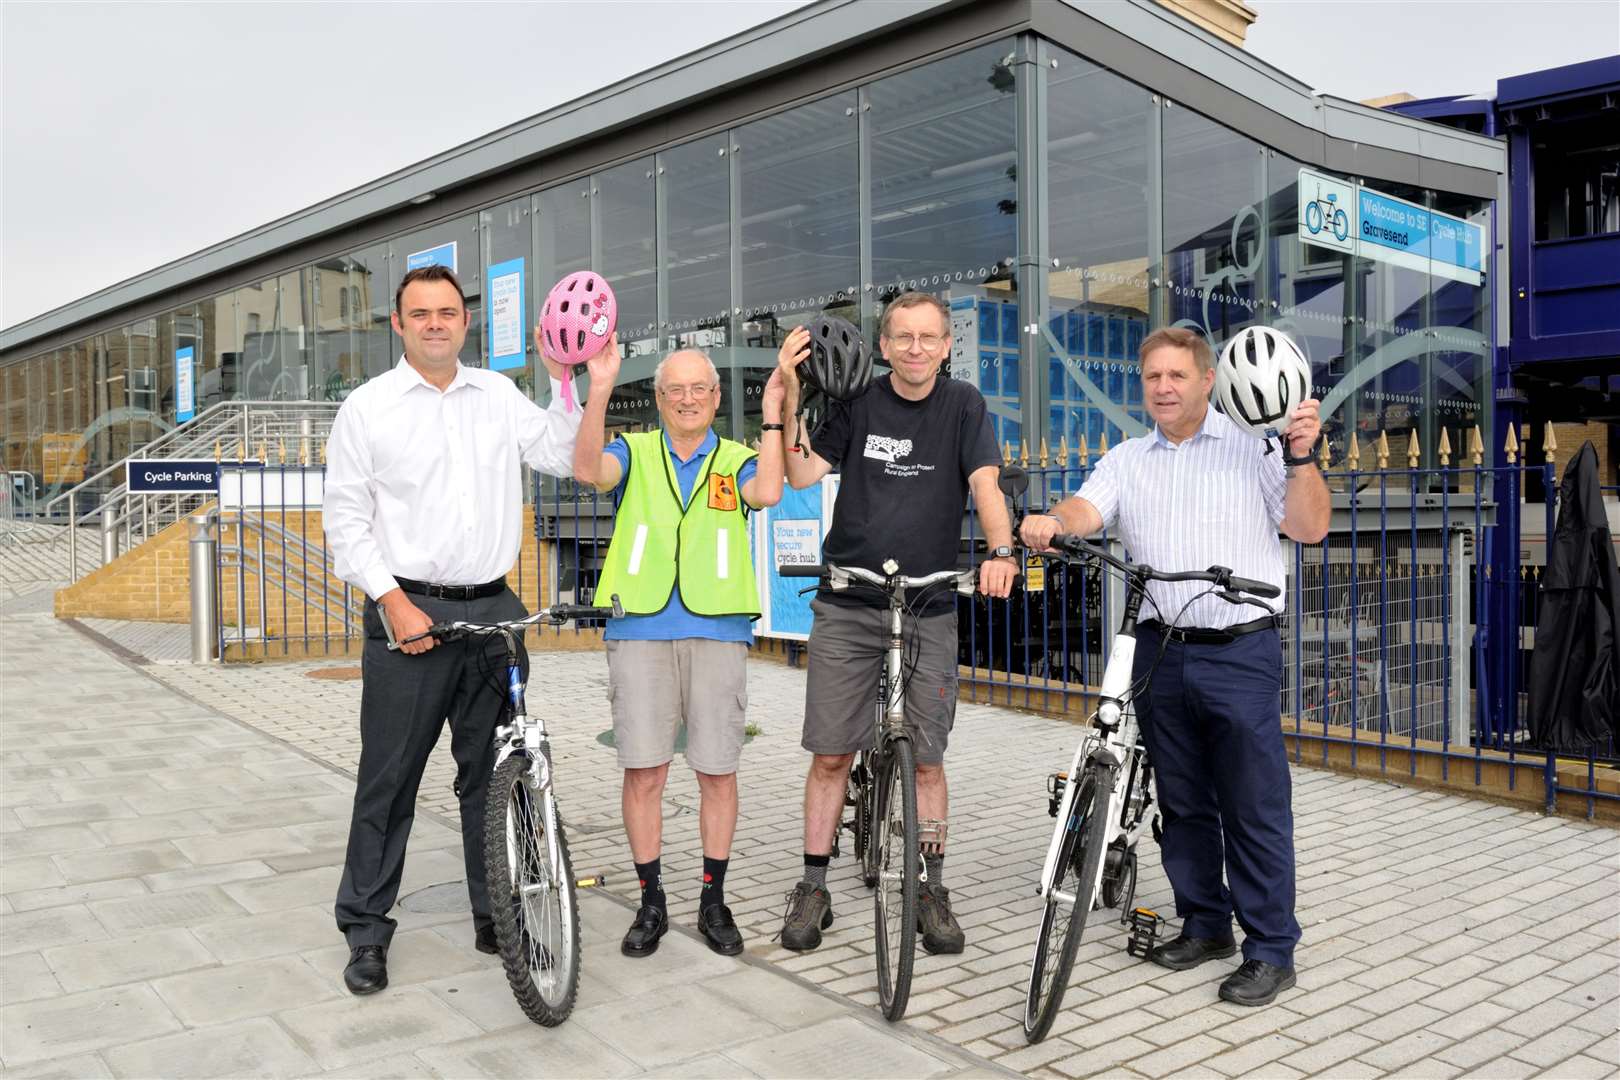 The launch of Gravesham cycle forum. Left-right: Cllr James Willis, Peter Willis - Sustrans Ranger, Alex Hills - Gravesend Rep for Campaign for Protection of Rural England, Cllr John Knight - cabinet member for public protection.